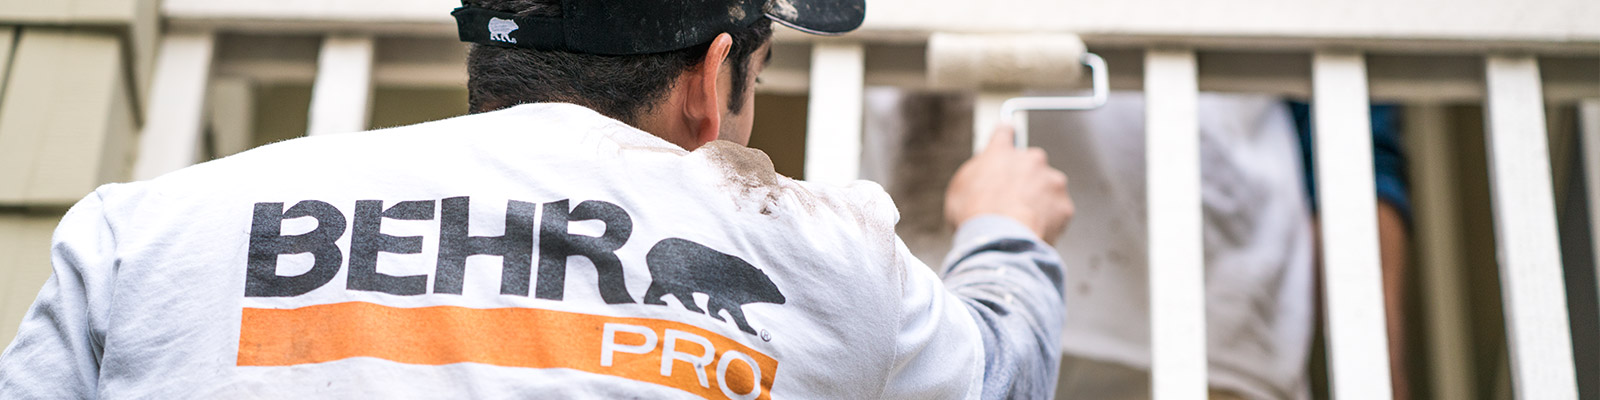 A close-up image of a back of a painting contractor who is painting with a roller with the logo of BEHR PRO imprinted on the shirt..